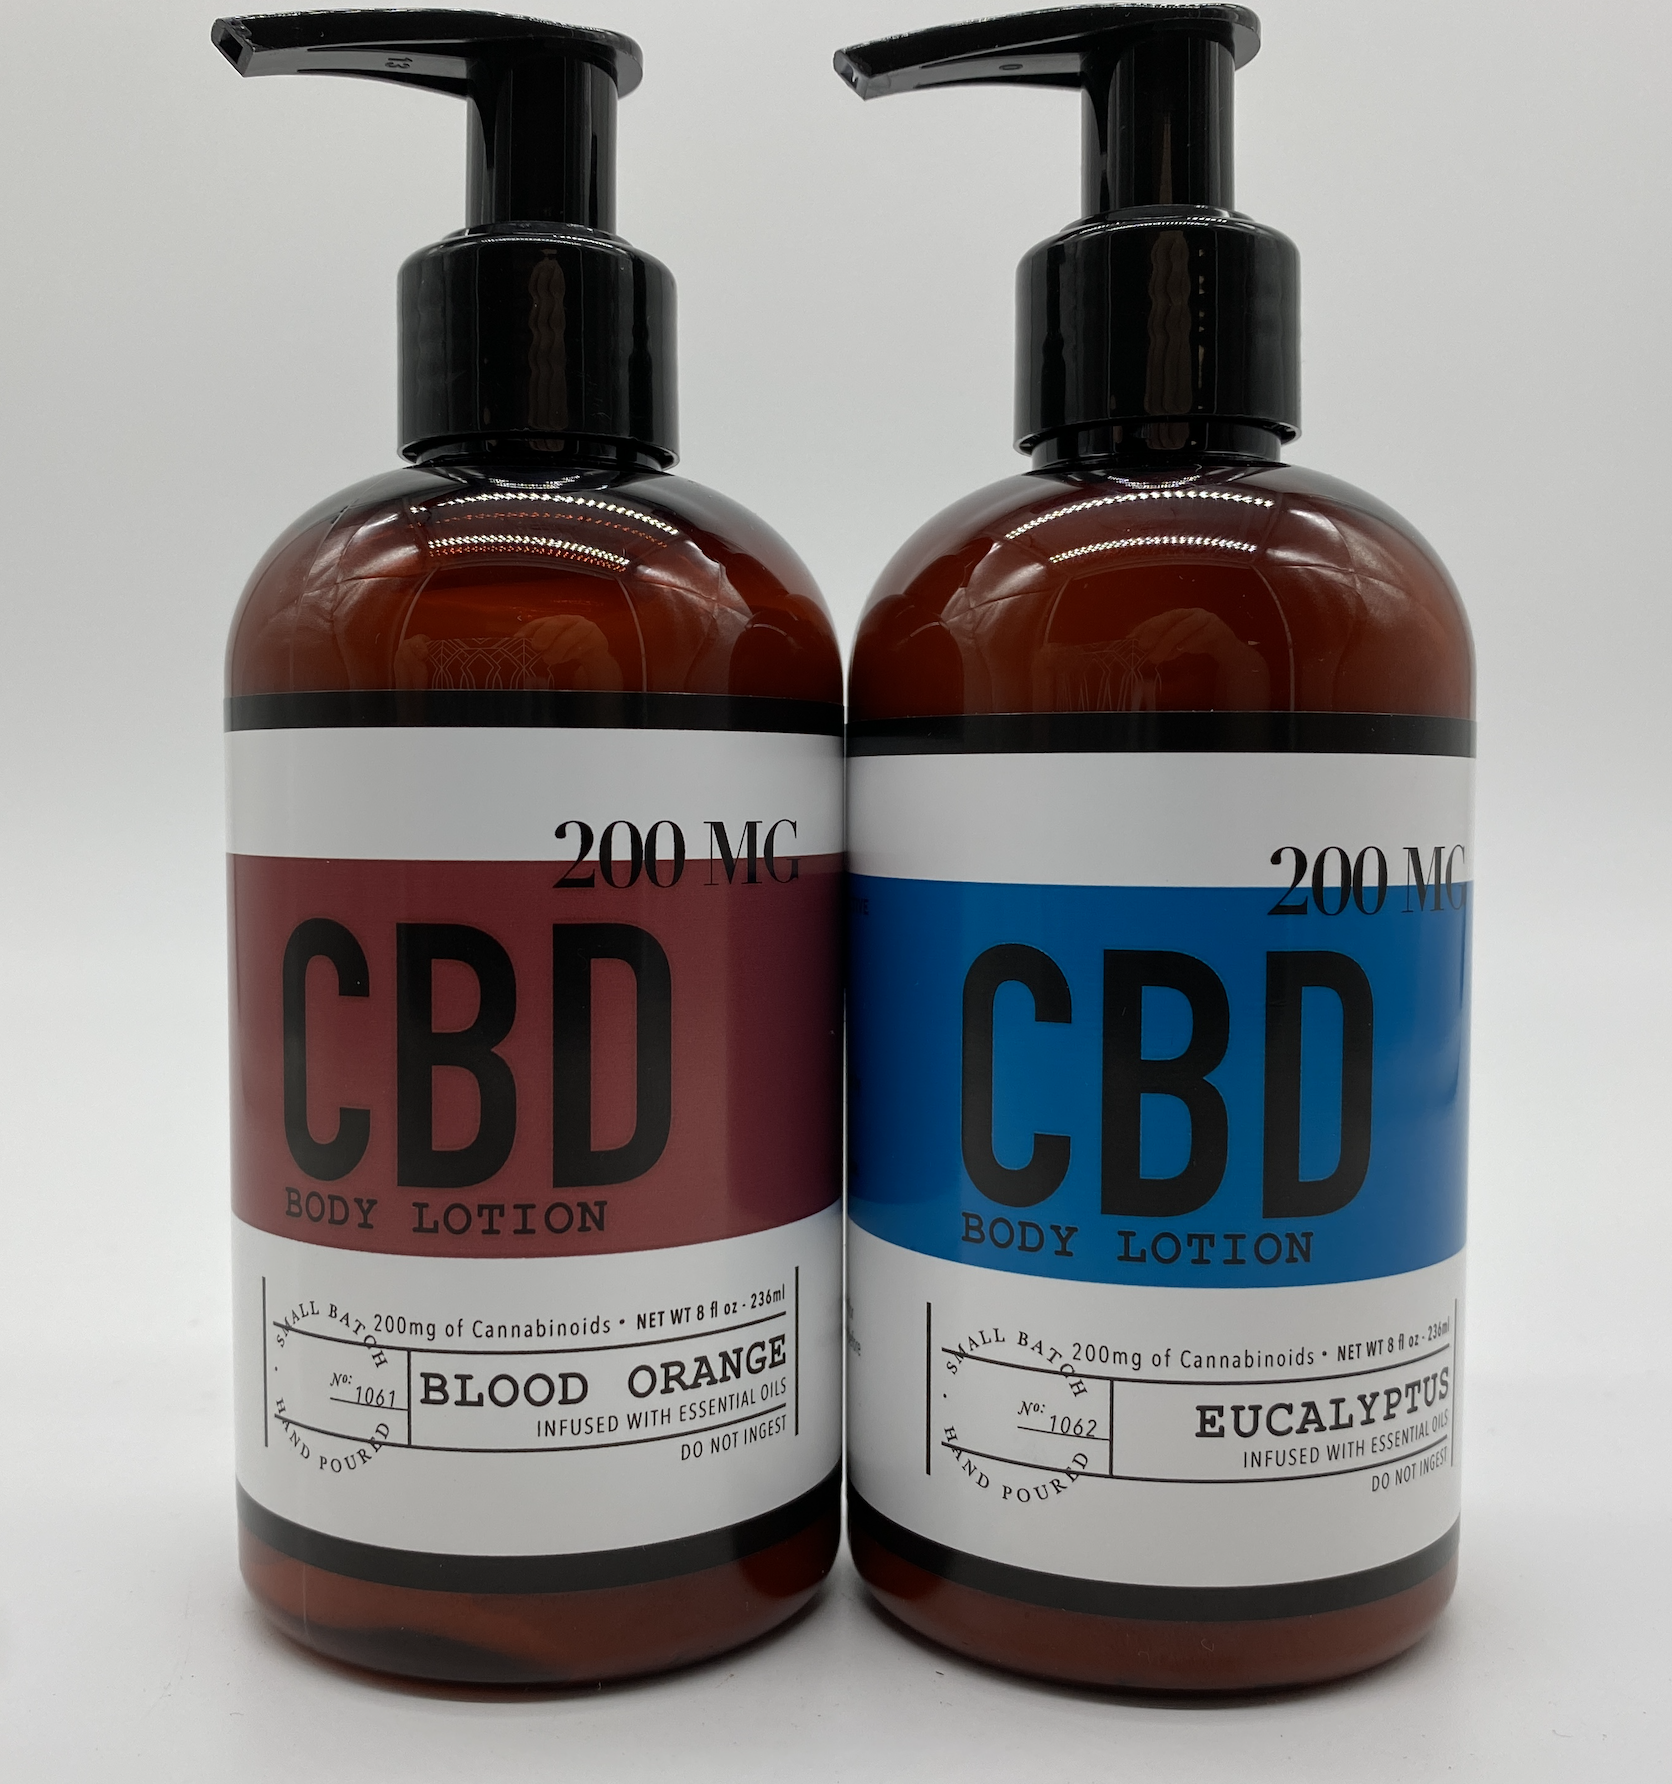 Best Quality CBD Topical Lotions Urban CBD Collective 404-443-3224